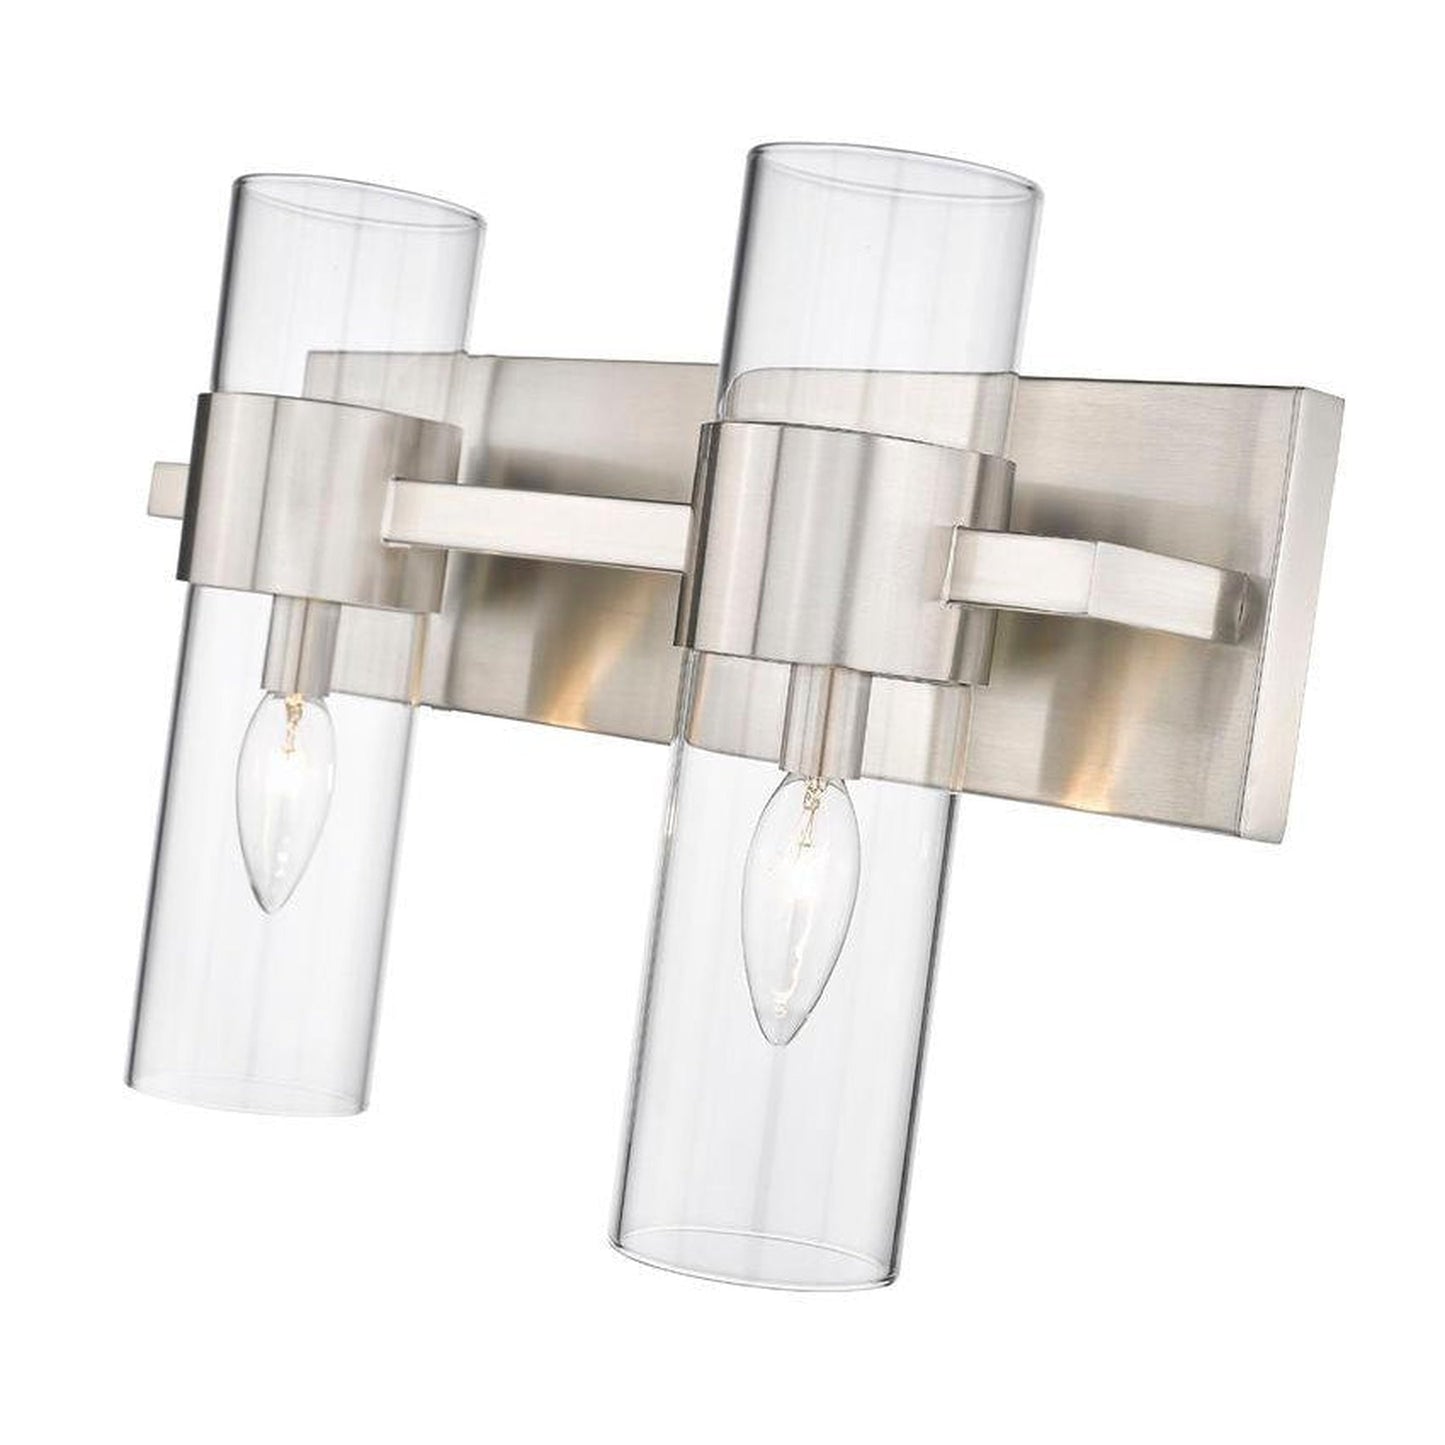 Z-Lite Lawson 17" 2-Light Brushed Nickel Vanity Light With Clear Glass Shade